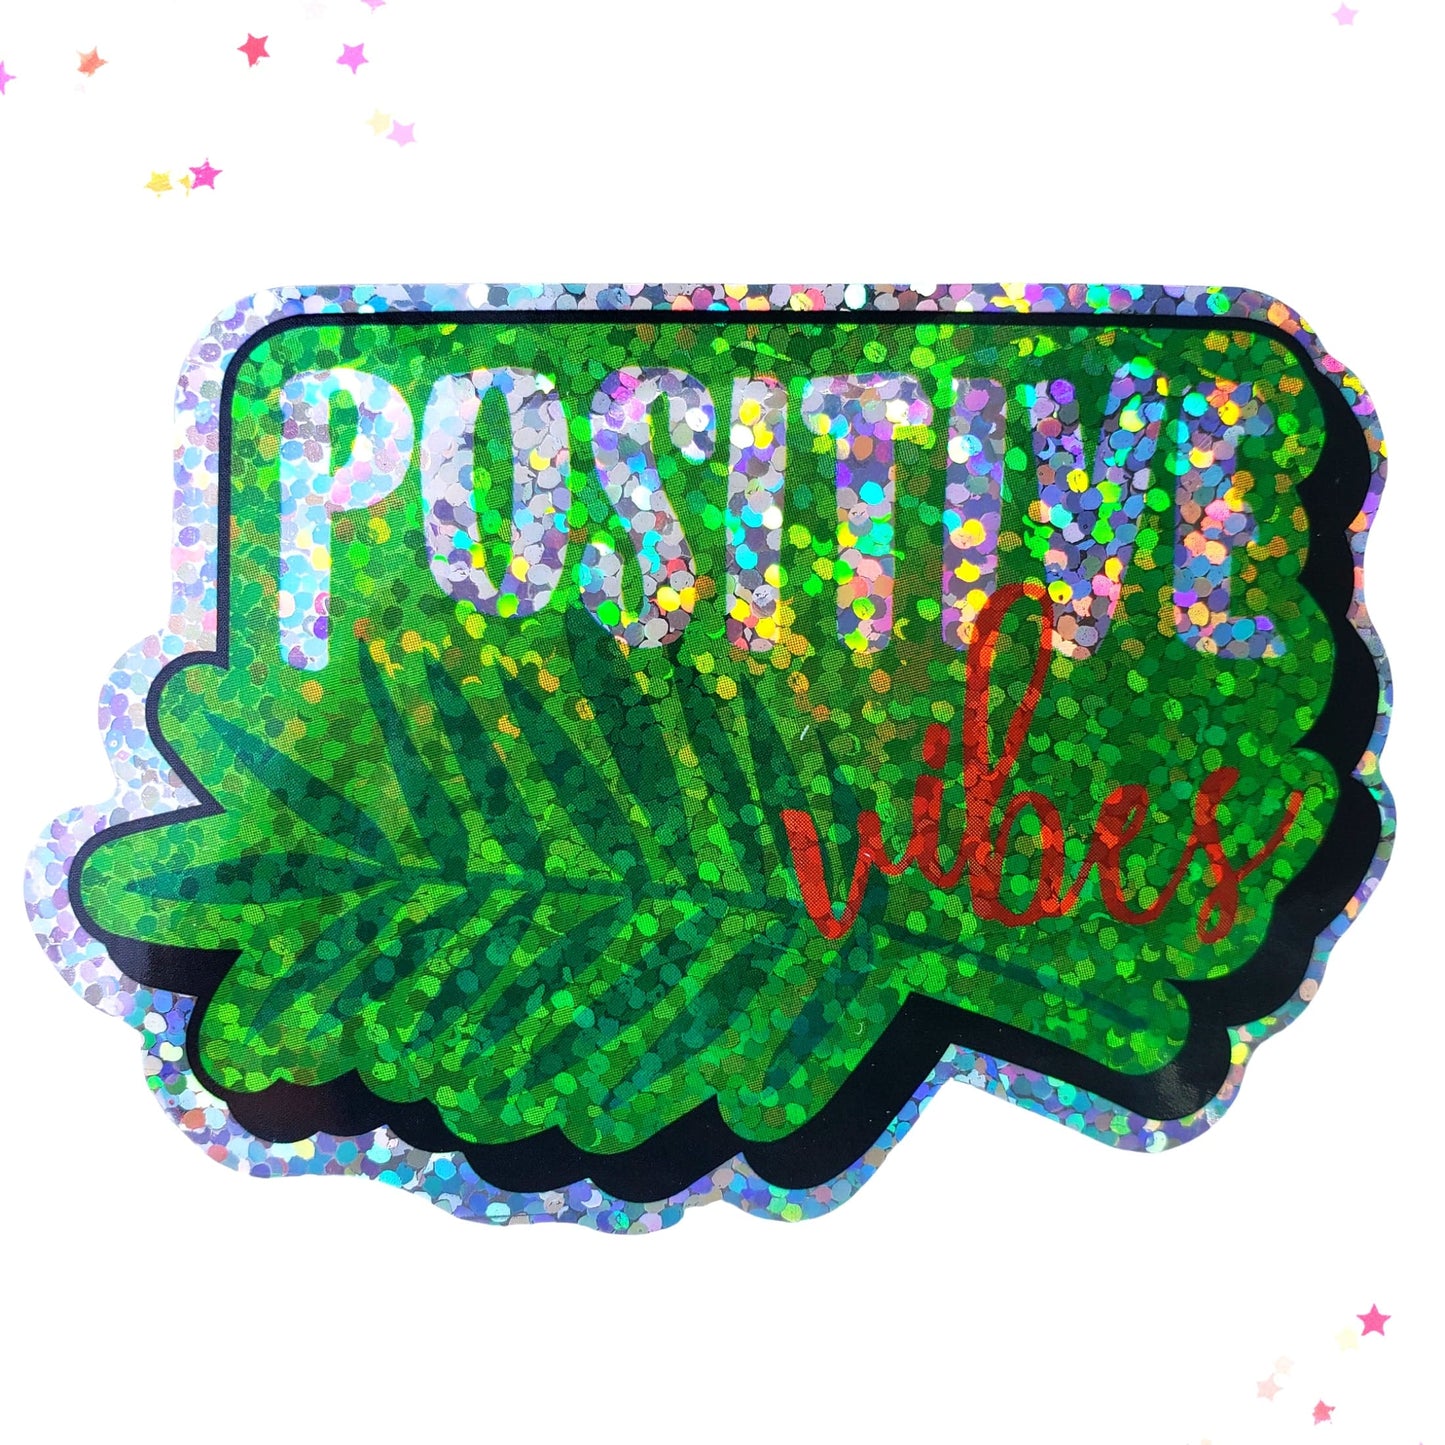 Premium Sticker - Sparkly Holographic Glitter Positive Vibes from Confetti Kitty, Only 2.00